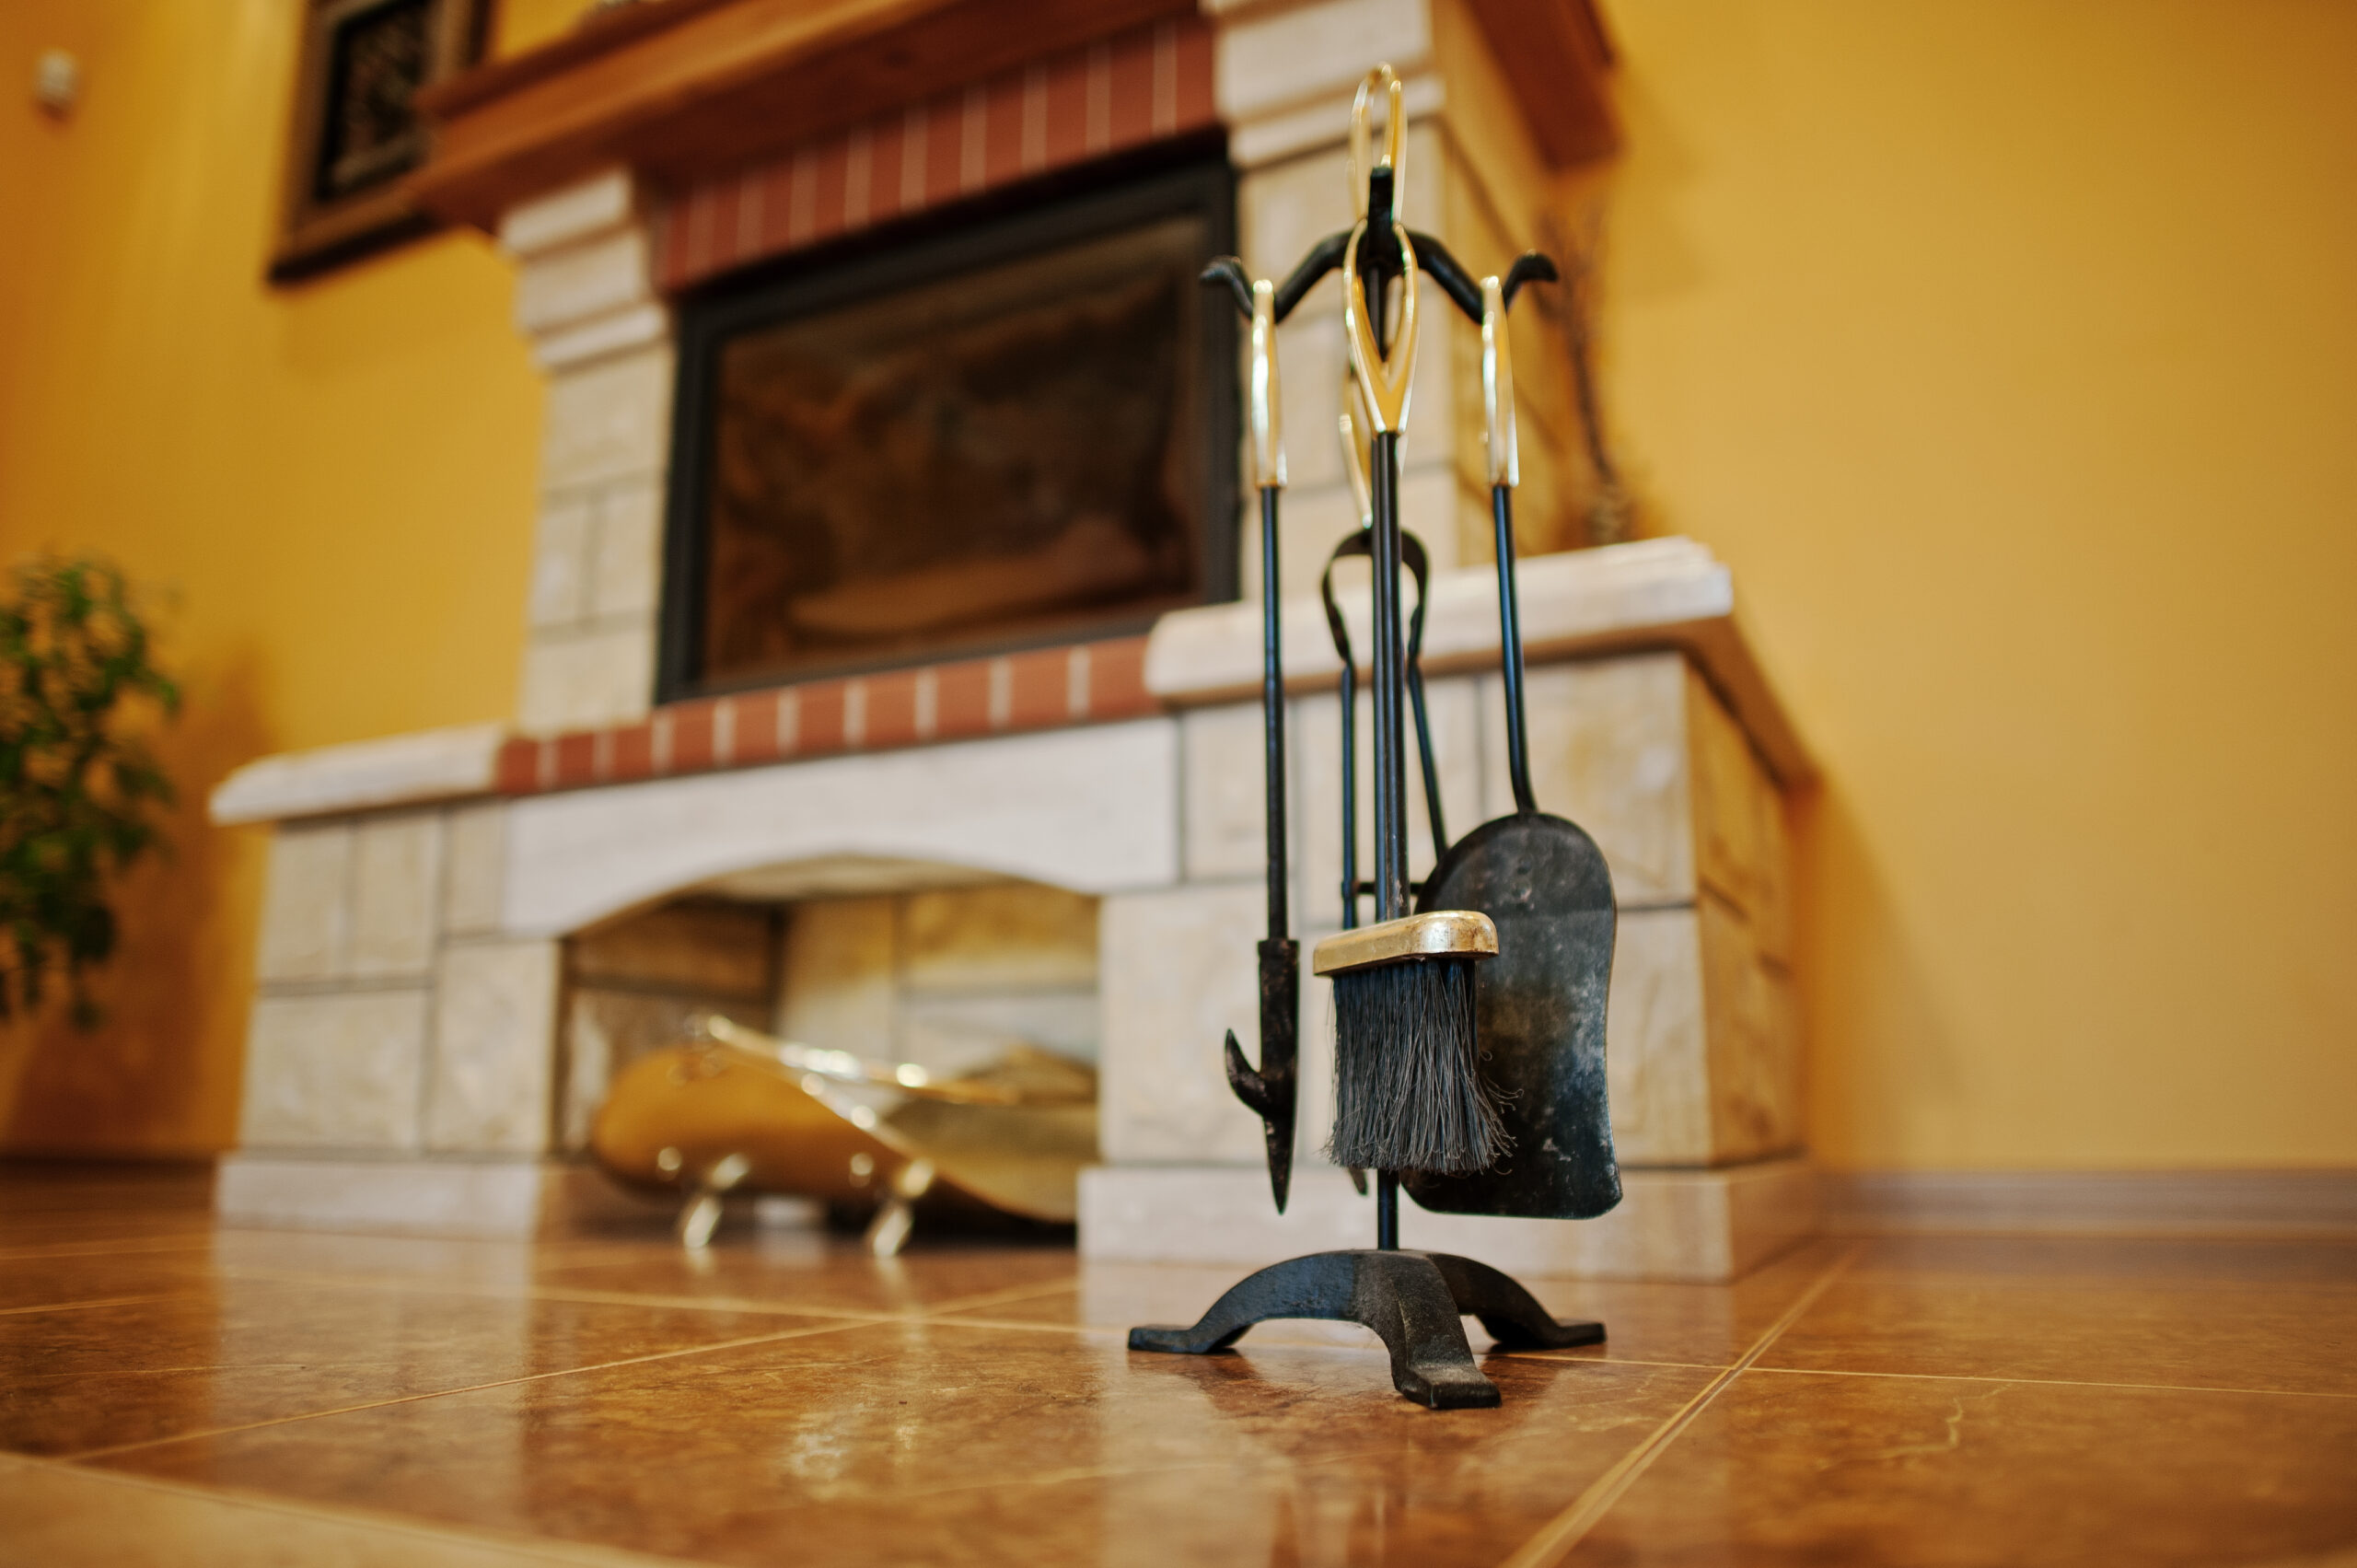 Fireplace accessories and tools